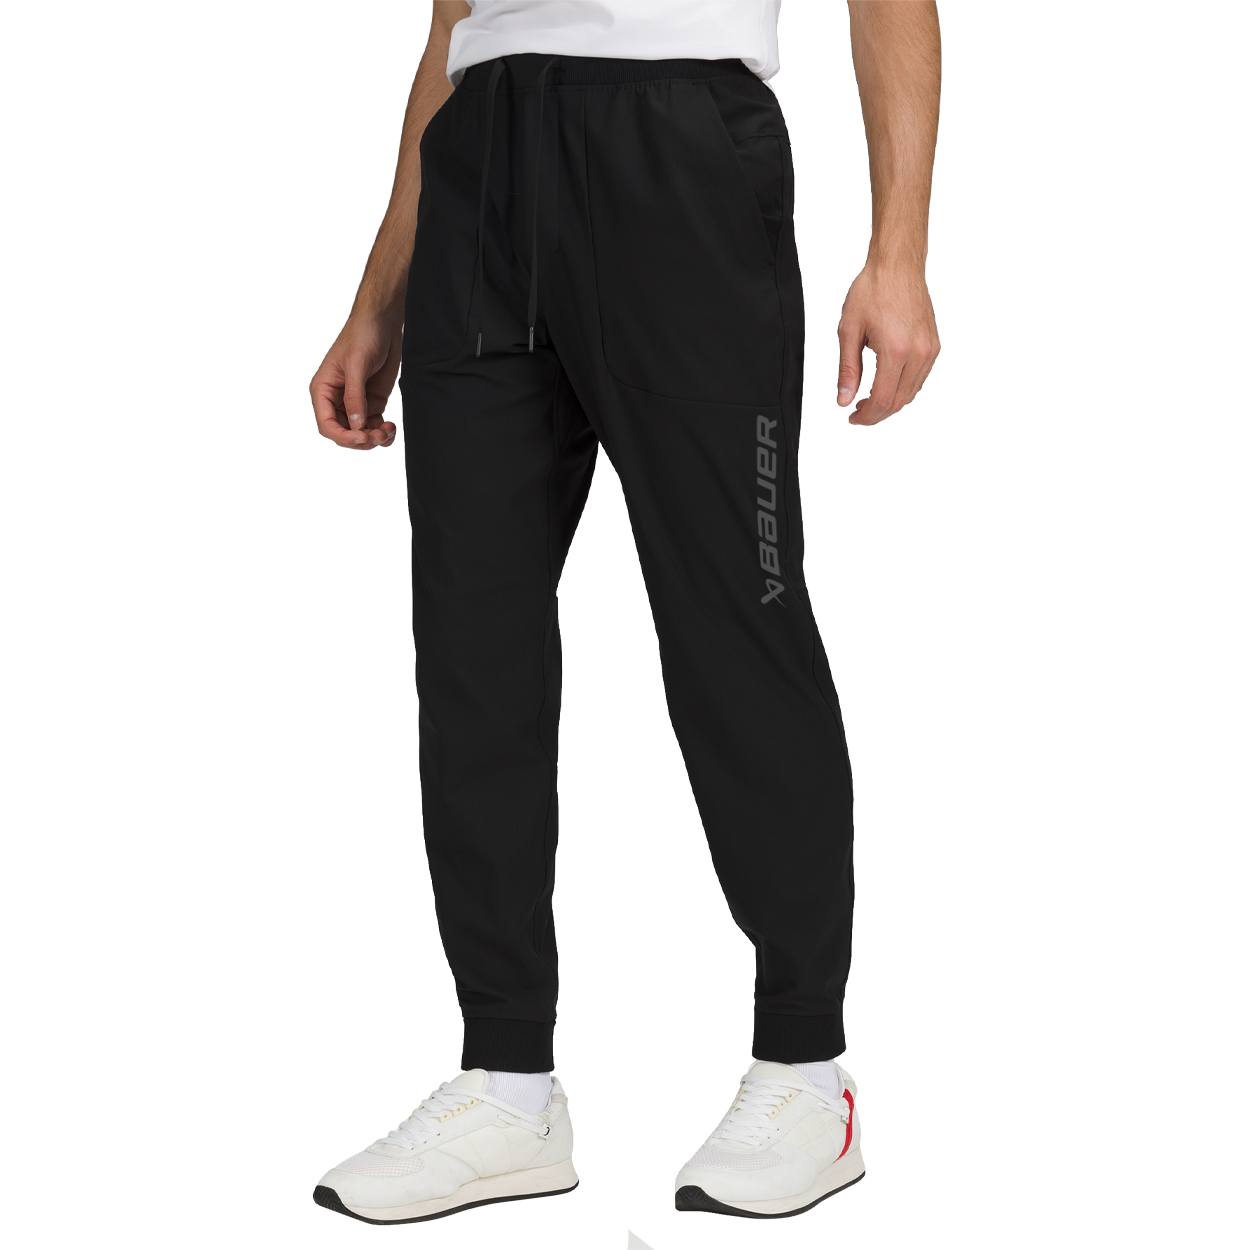 fvwitlyh Boys Cotton And Men's Perspiration Tights High Leggings Sports  Quick And Trousers With Pockets Training Away Track Pants